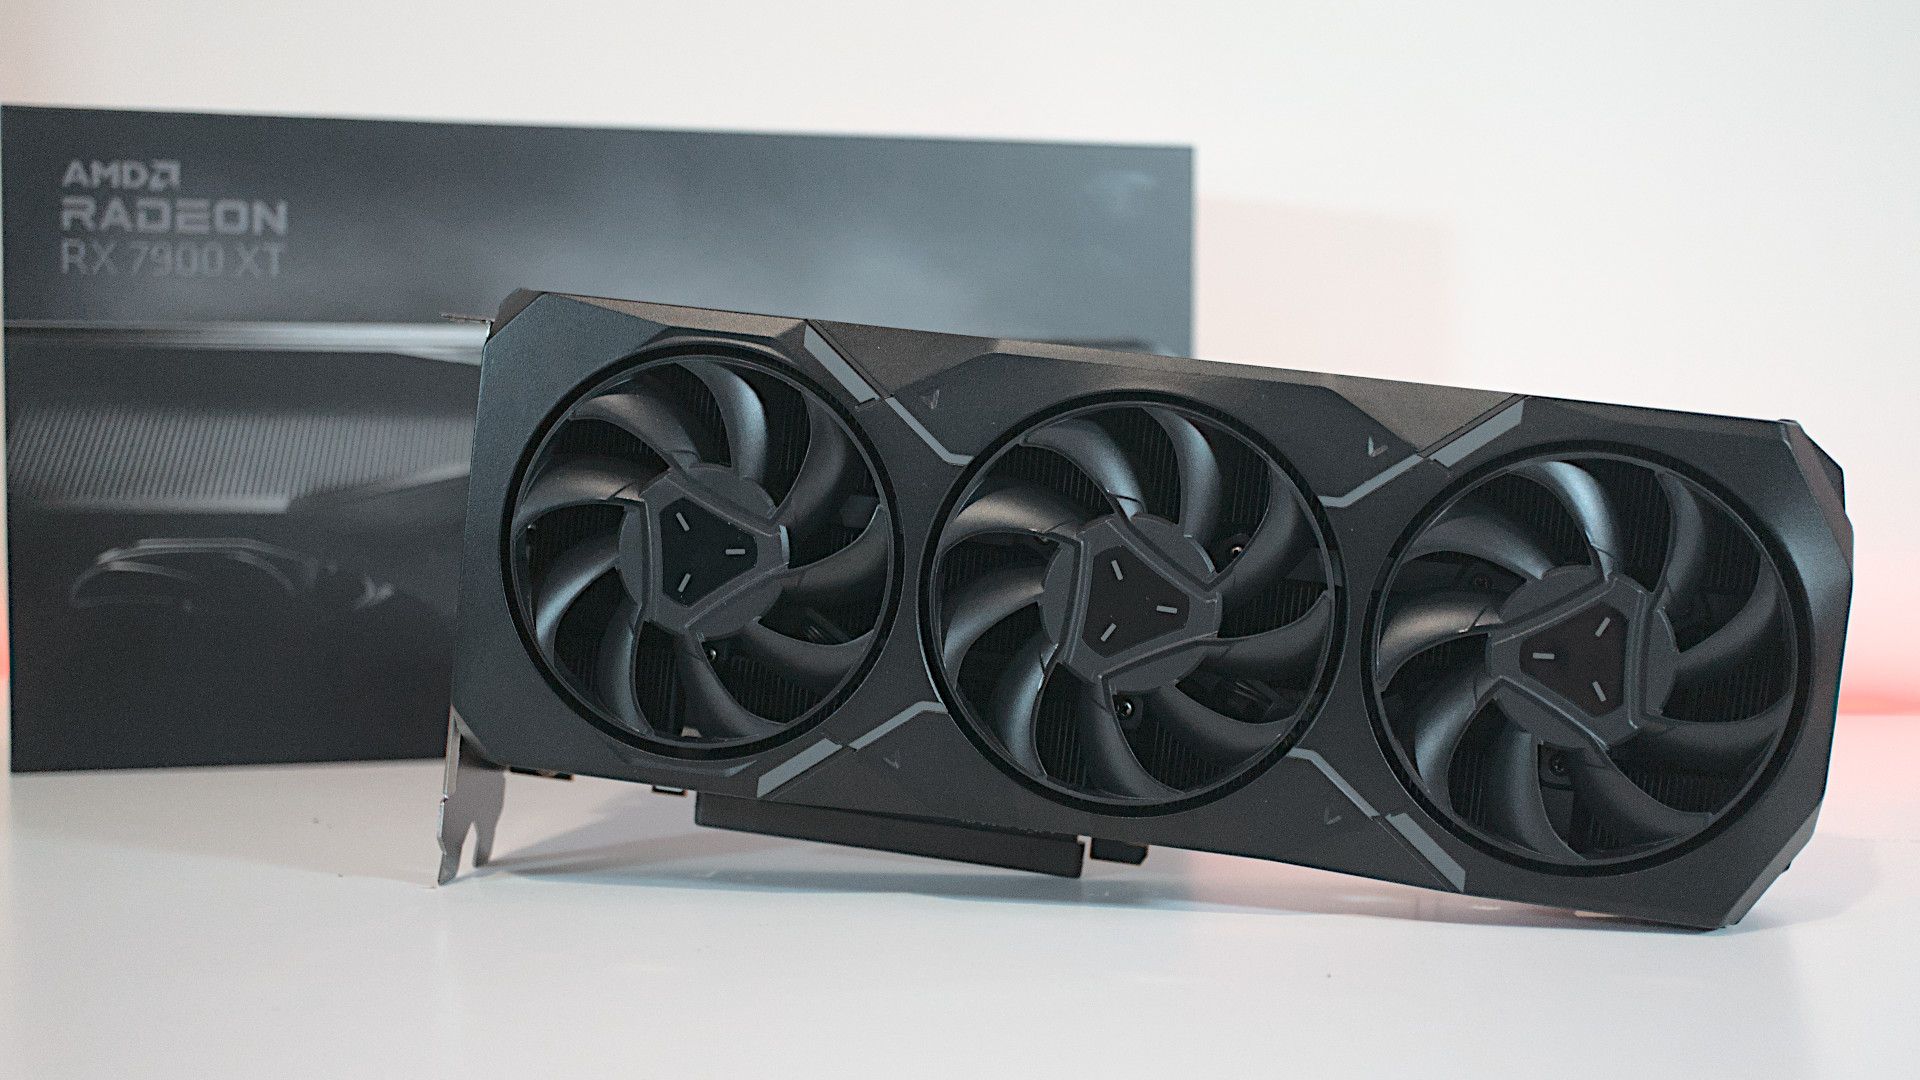 AMD Radeon RX 7900 XT review: Undercutting the RTX 4080 by $300